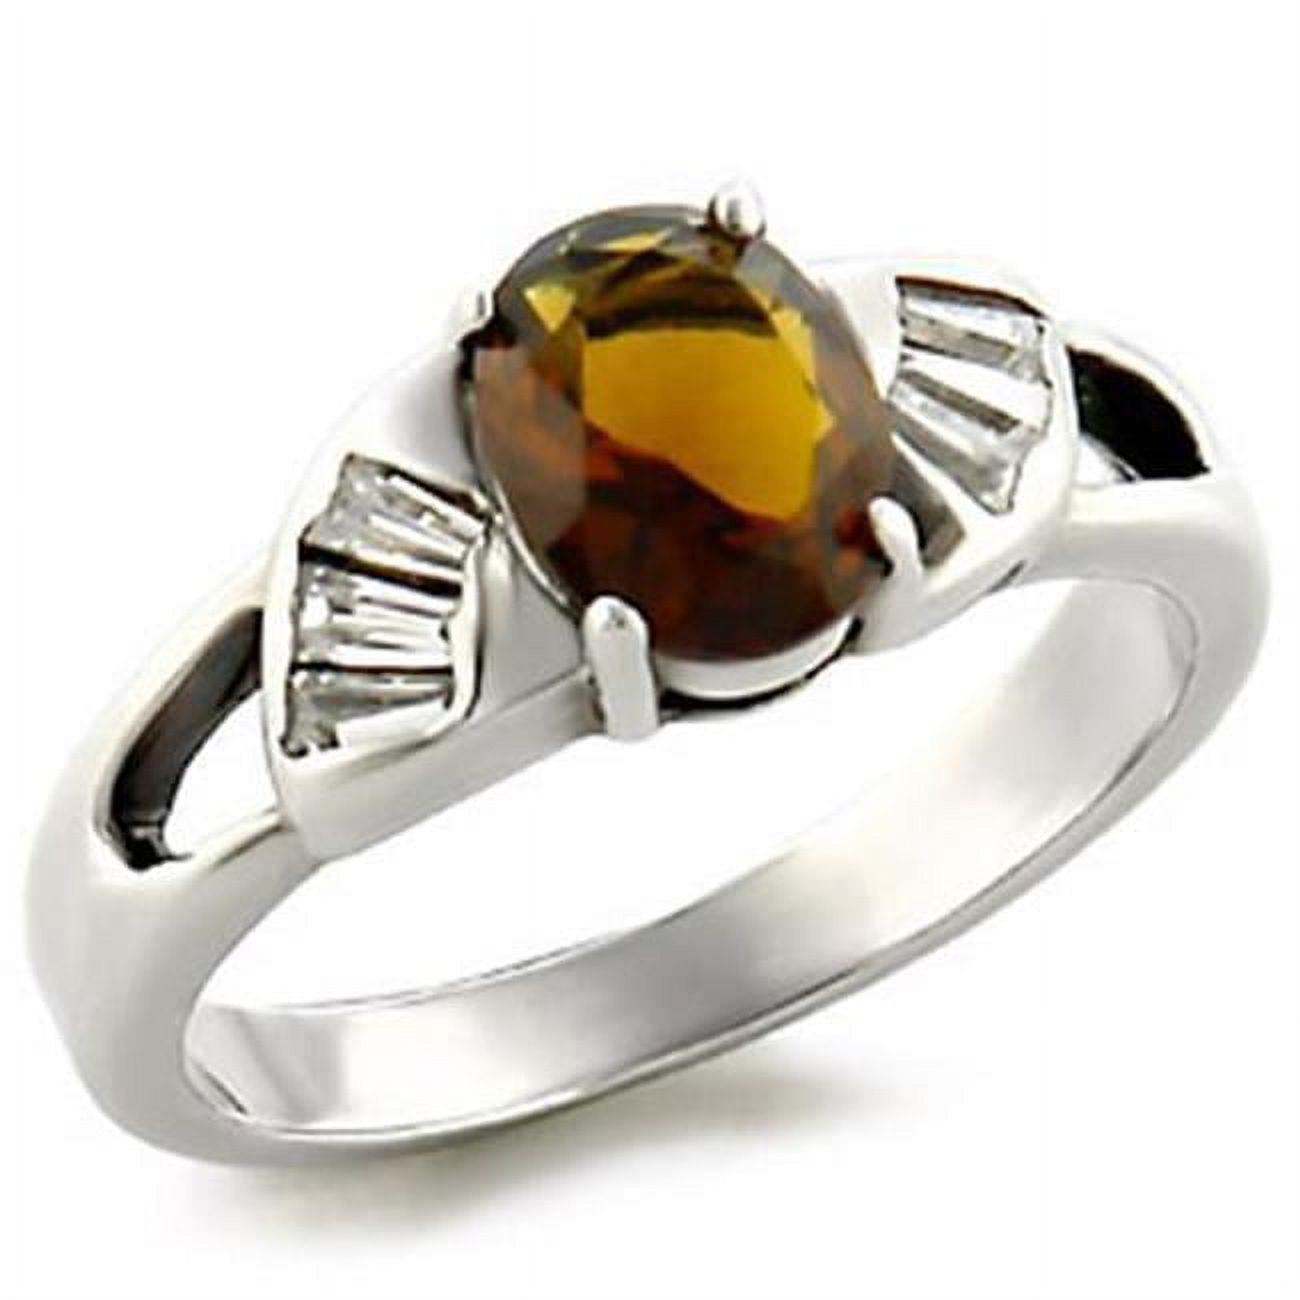 Picture of Alamode LOAS827-9 Women High-Polished 925 Sterling Silver Ring with Semi-Precious in Smoky Topaz - Size 9